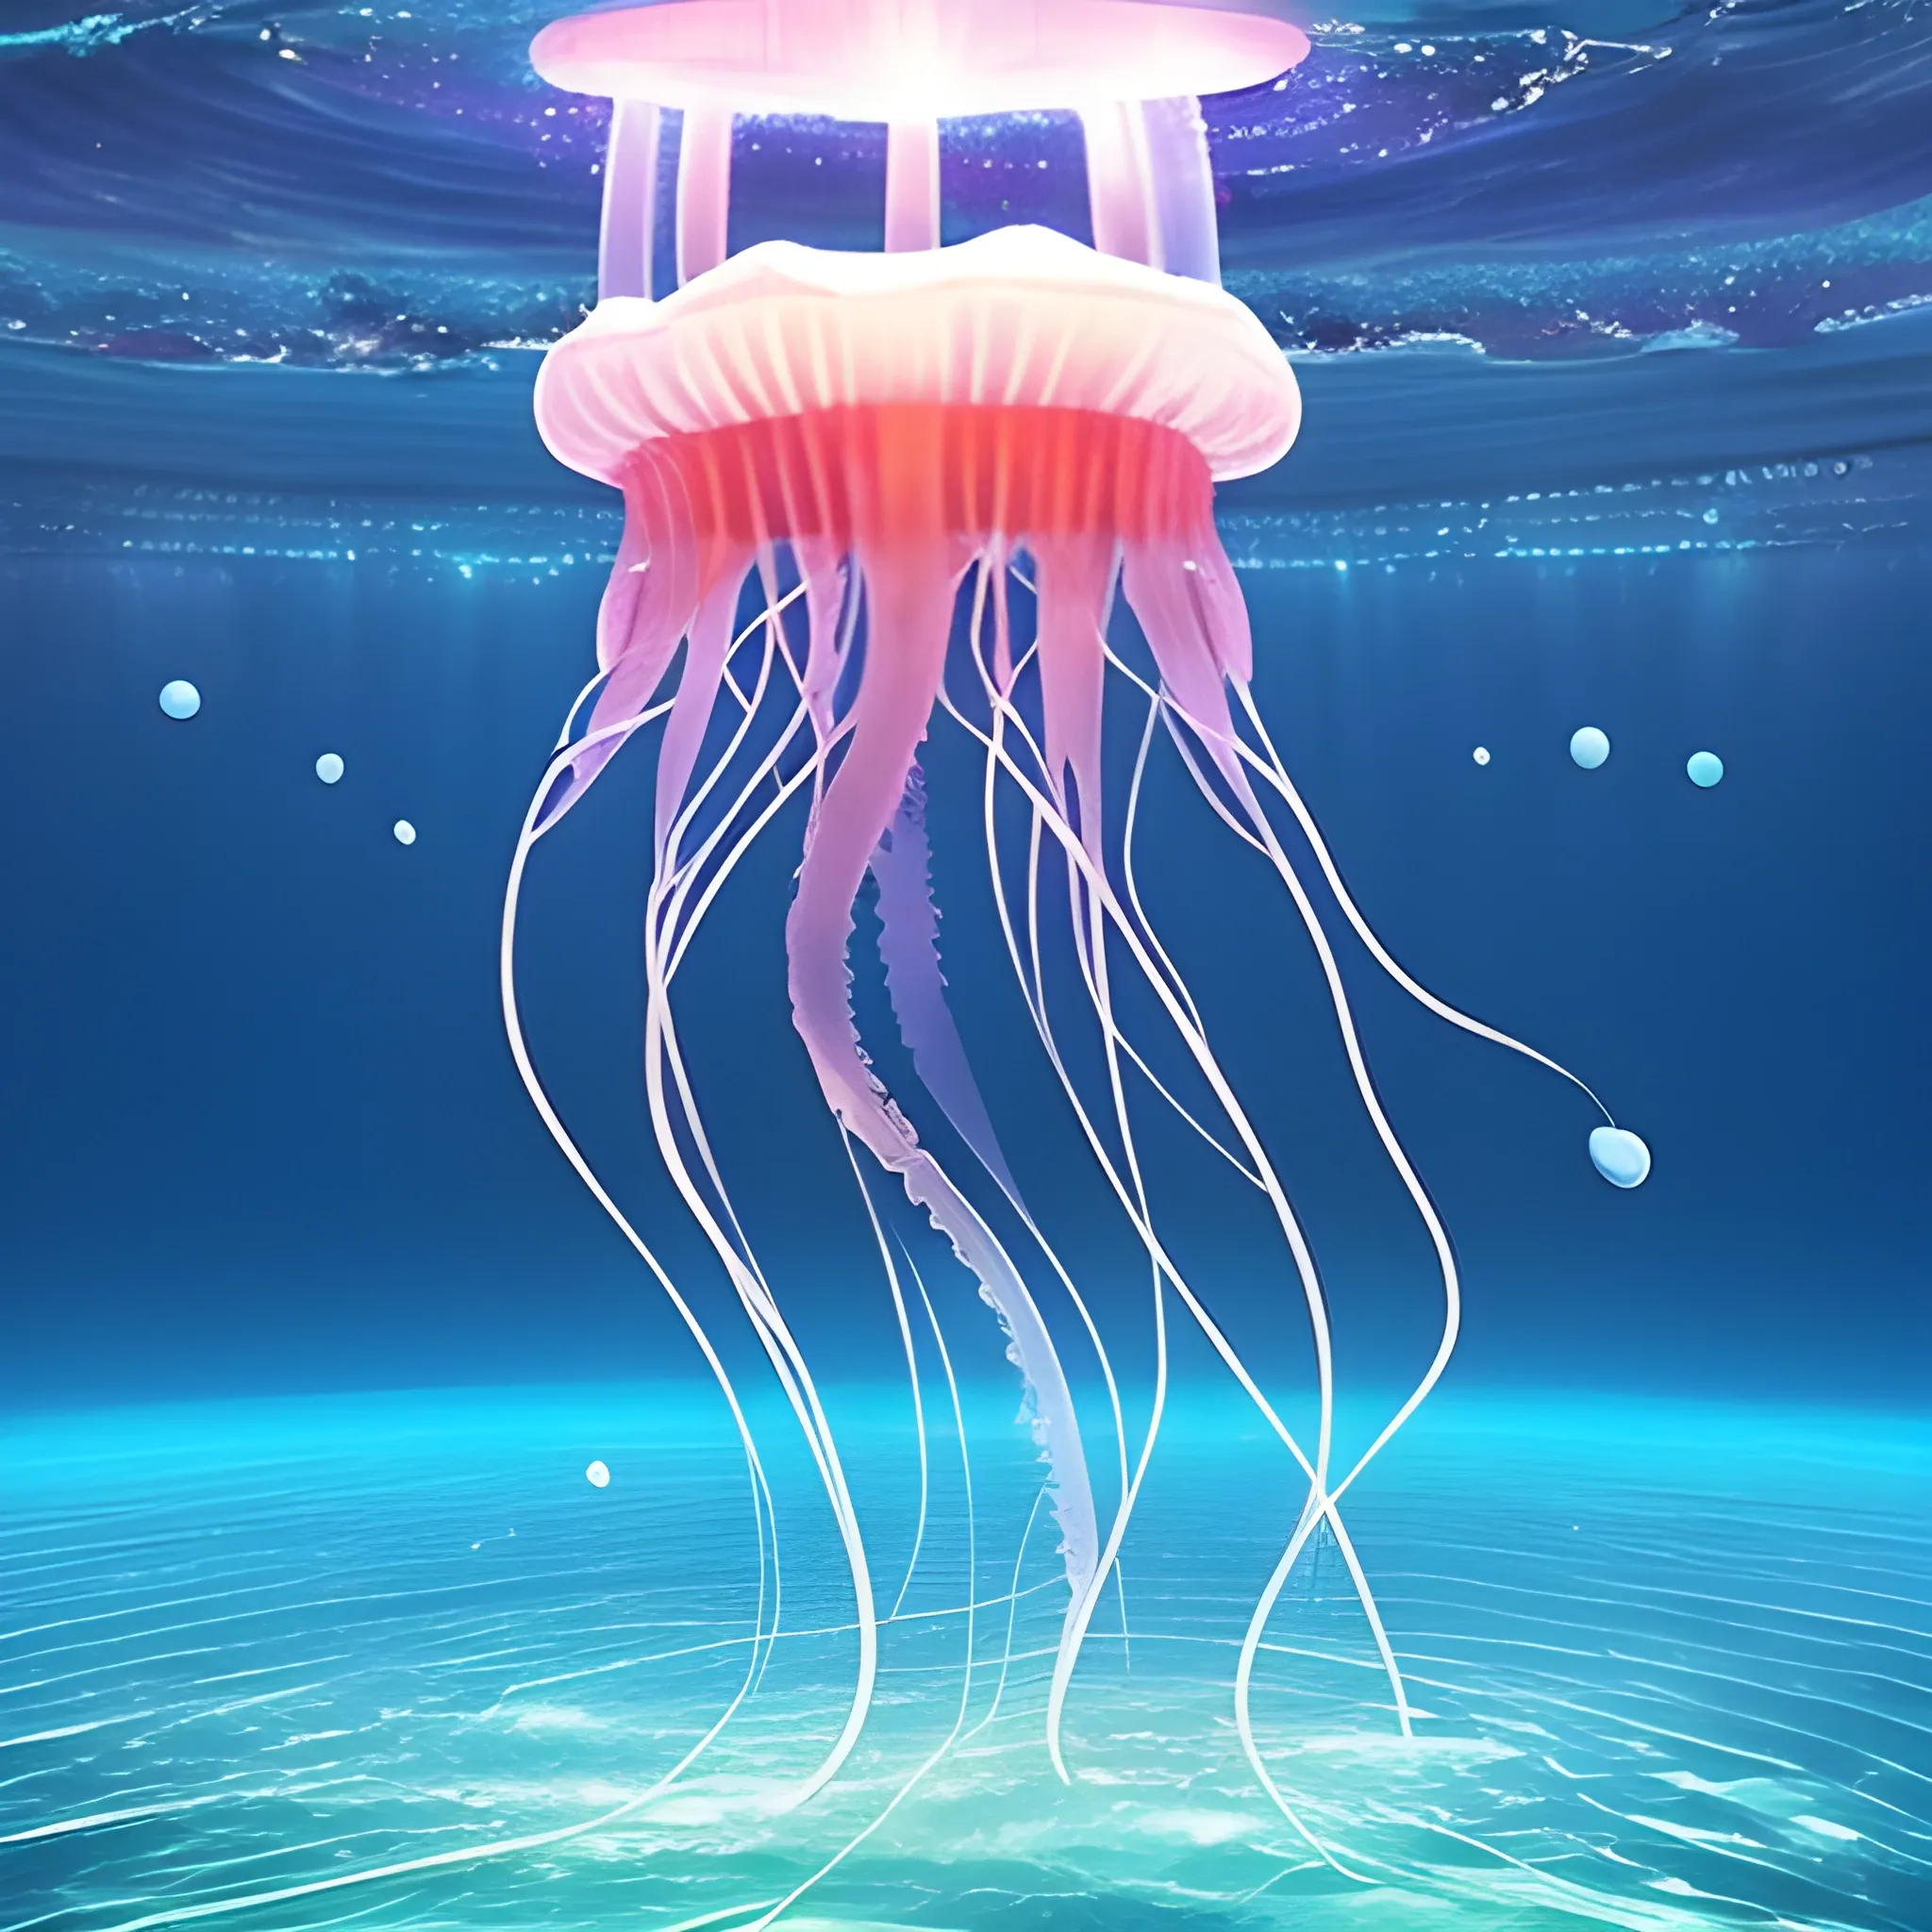 jellyfish in the ocean that looks like the space